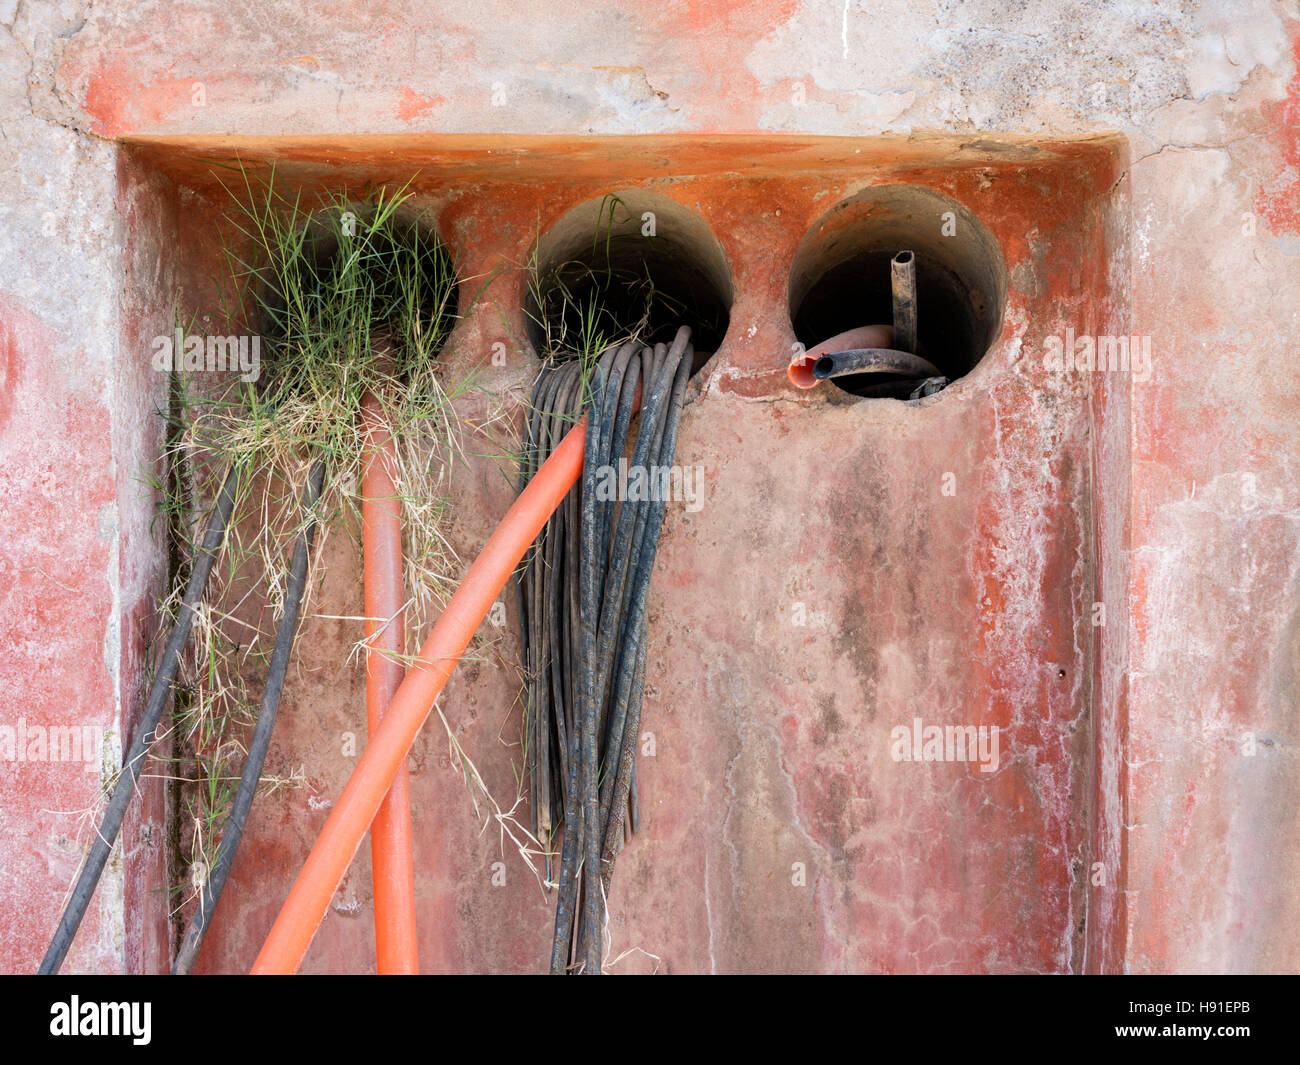 Tadelakt pink wall containing plastic piping emerging out of three circular outlets, with weed and water stains Stock Photo